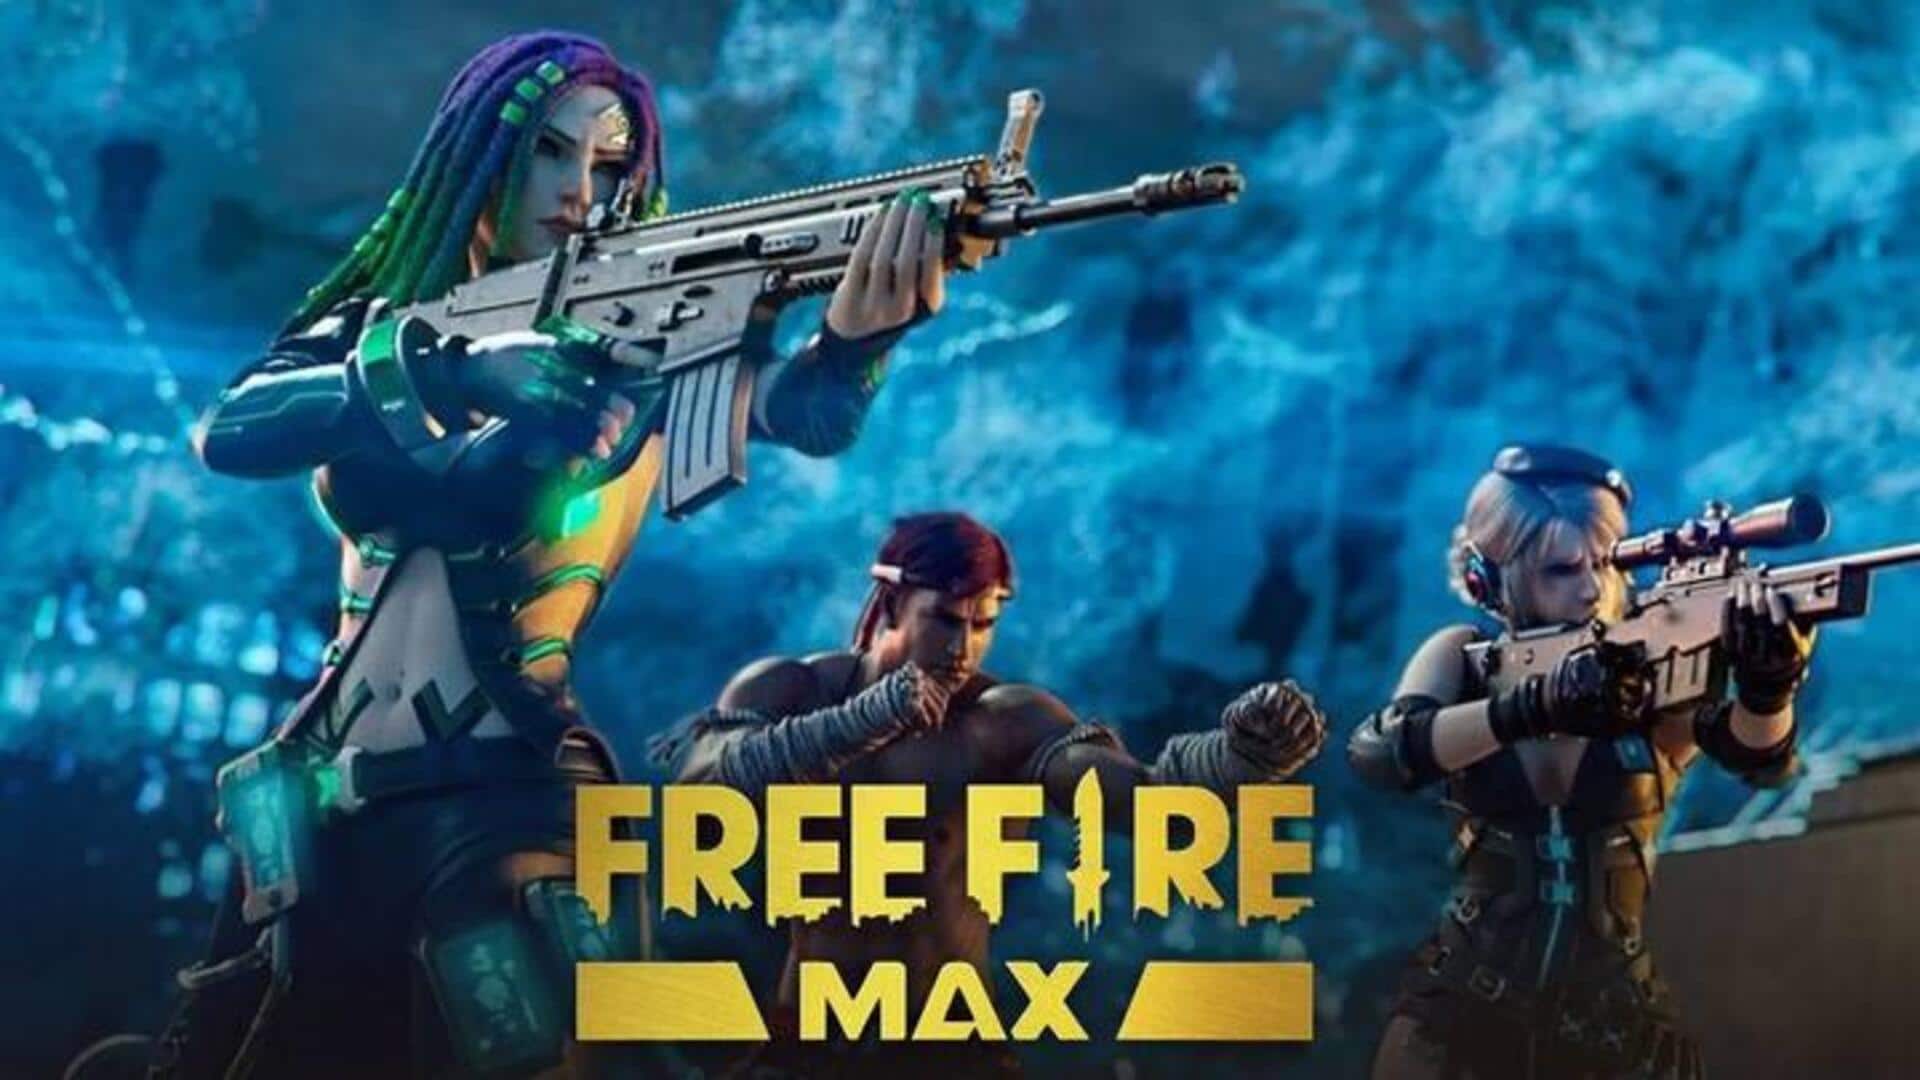 Garena Free Fire MAX codes for today: How to redeem